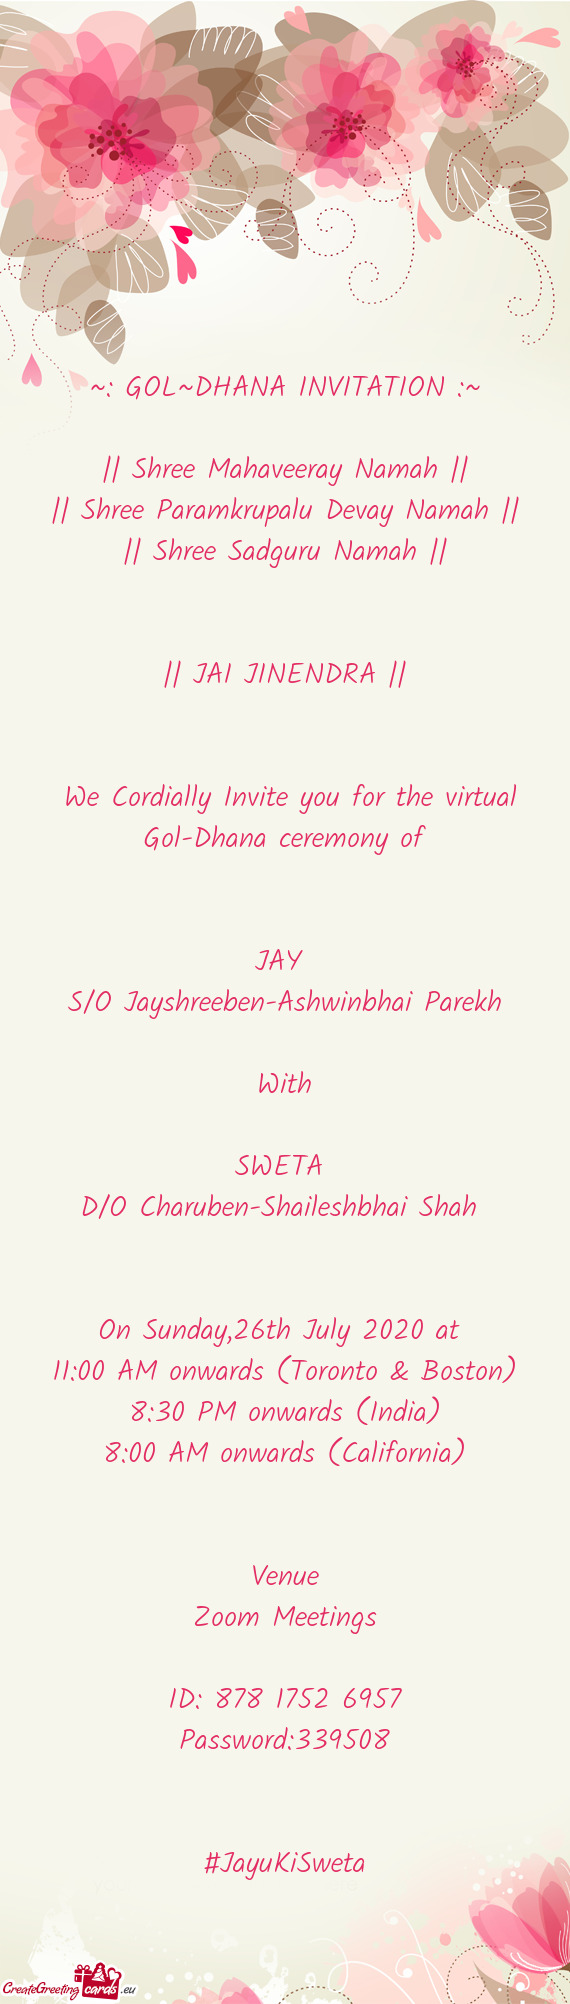 We Cordially Invite you for the virtual Gol-Dhana ceremony of